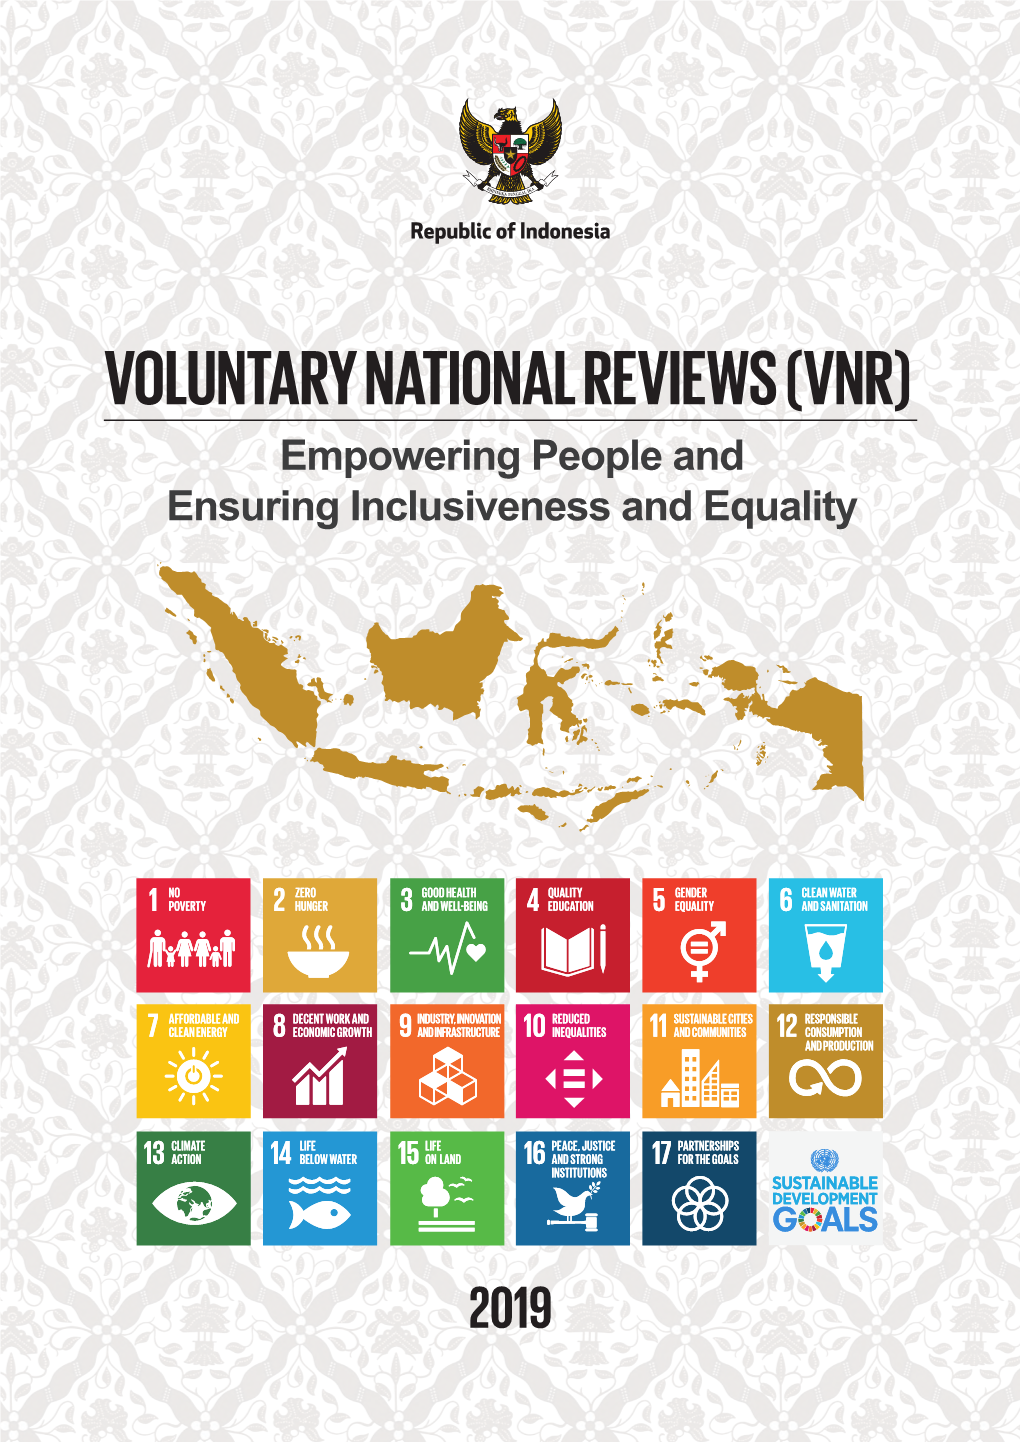 VNR) Empowering People and Ensuring Inclusiveness and Equality